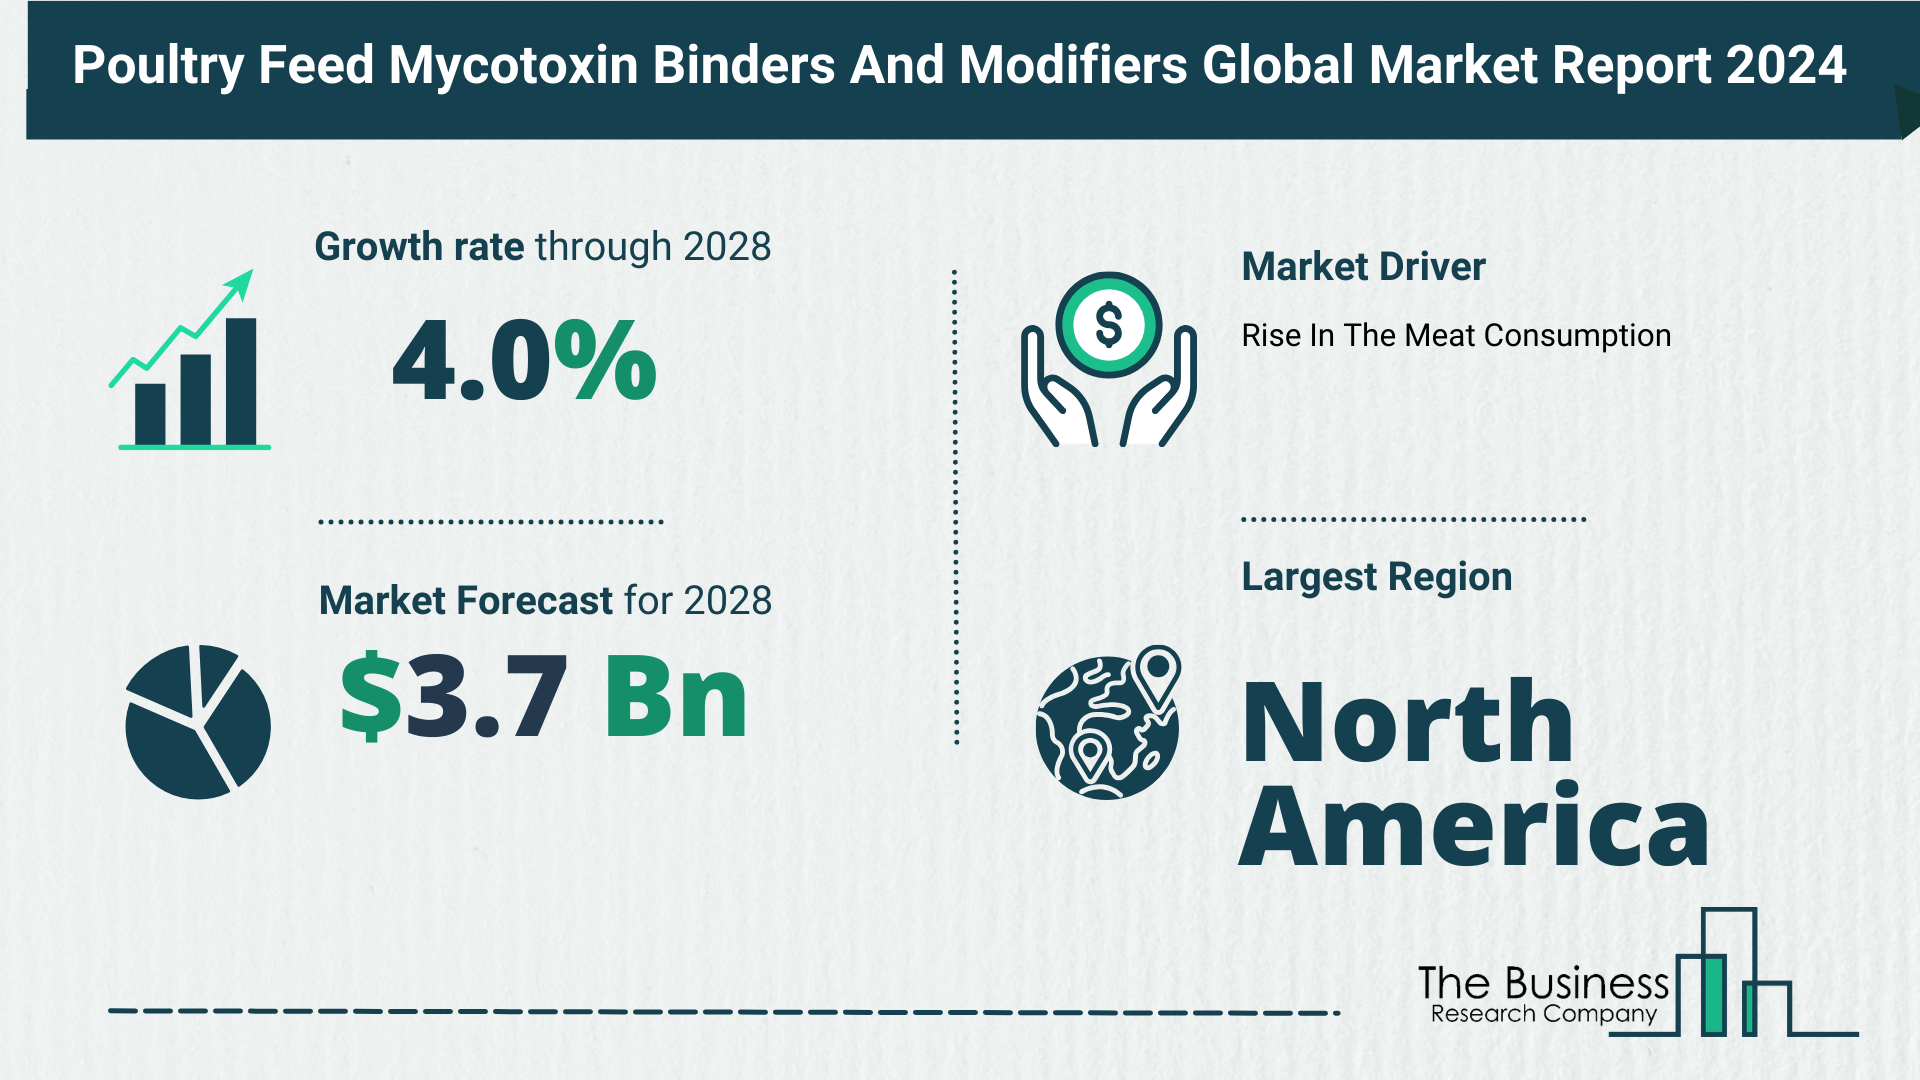 What Is The Forecast Growth Rate For The Poultry Feed Mycotoxin Binders And Modifiers Market?